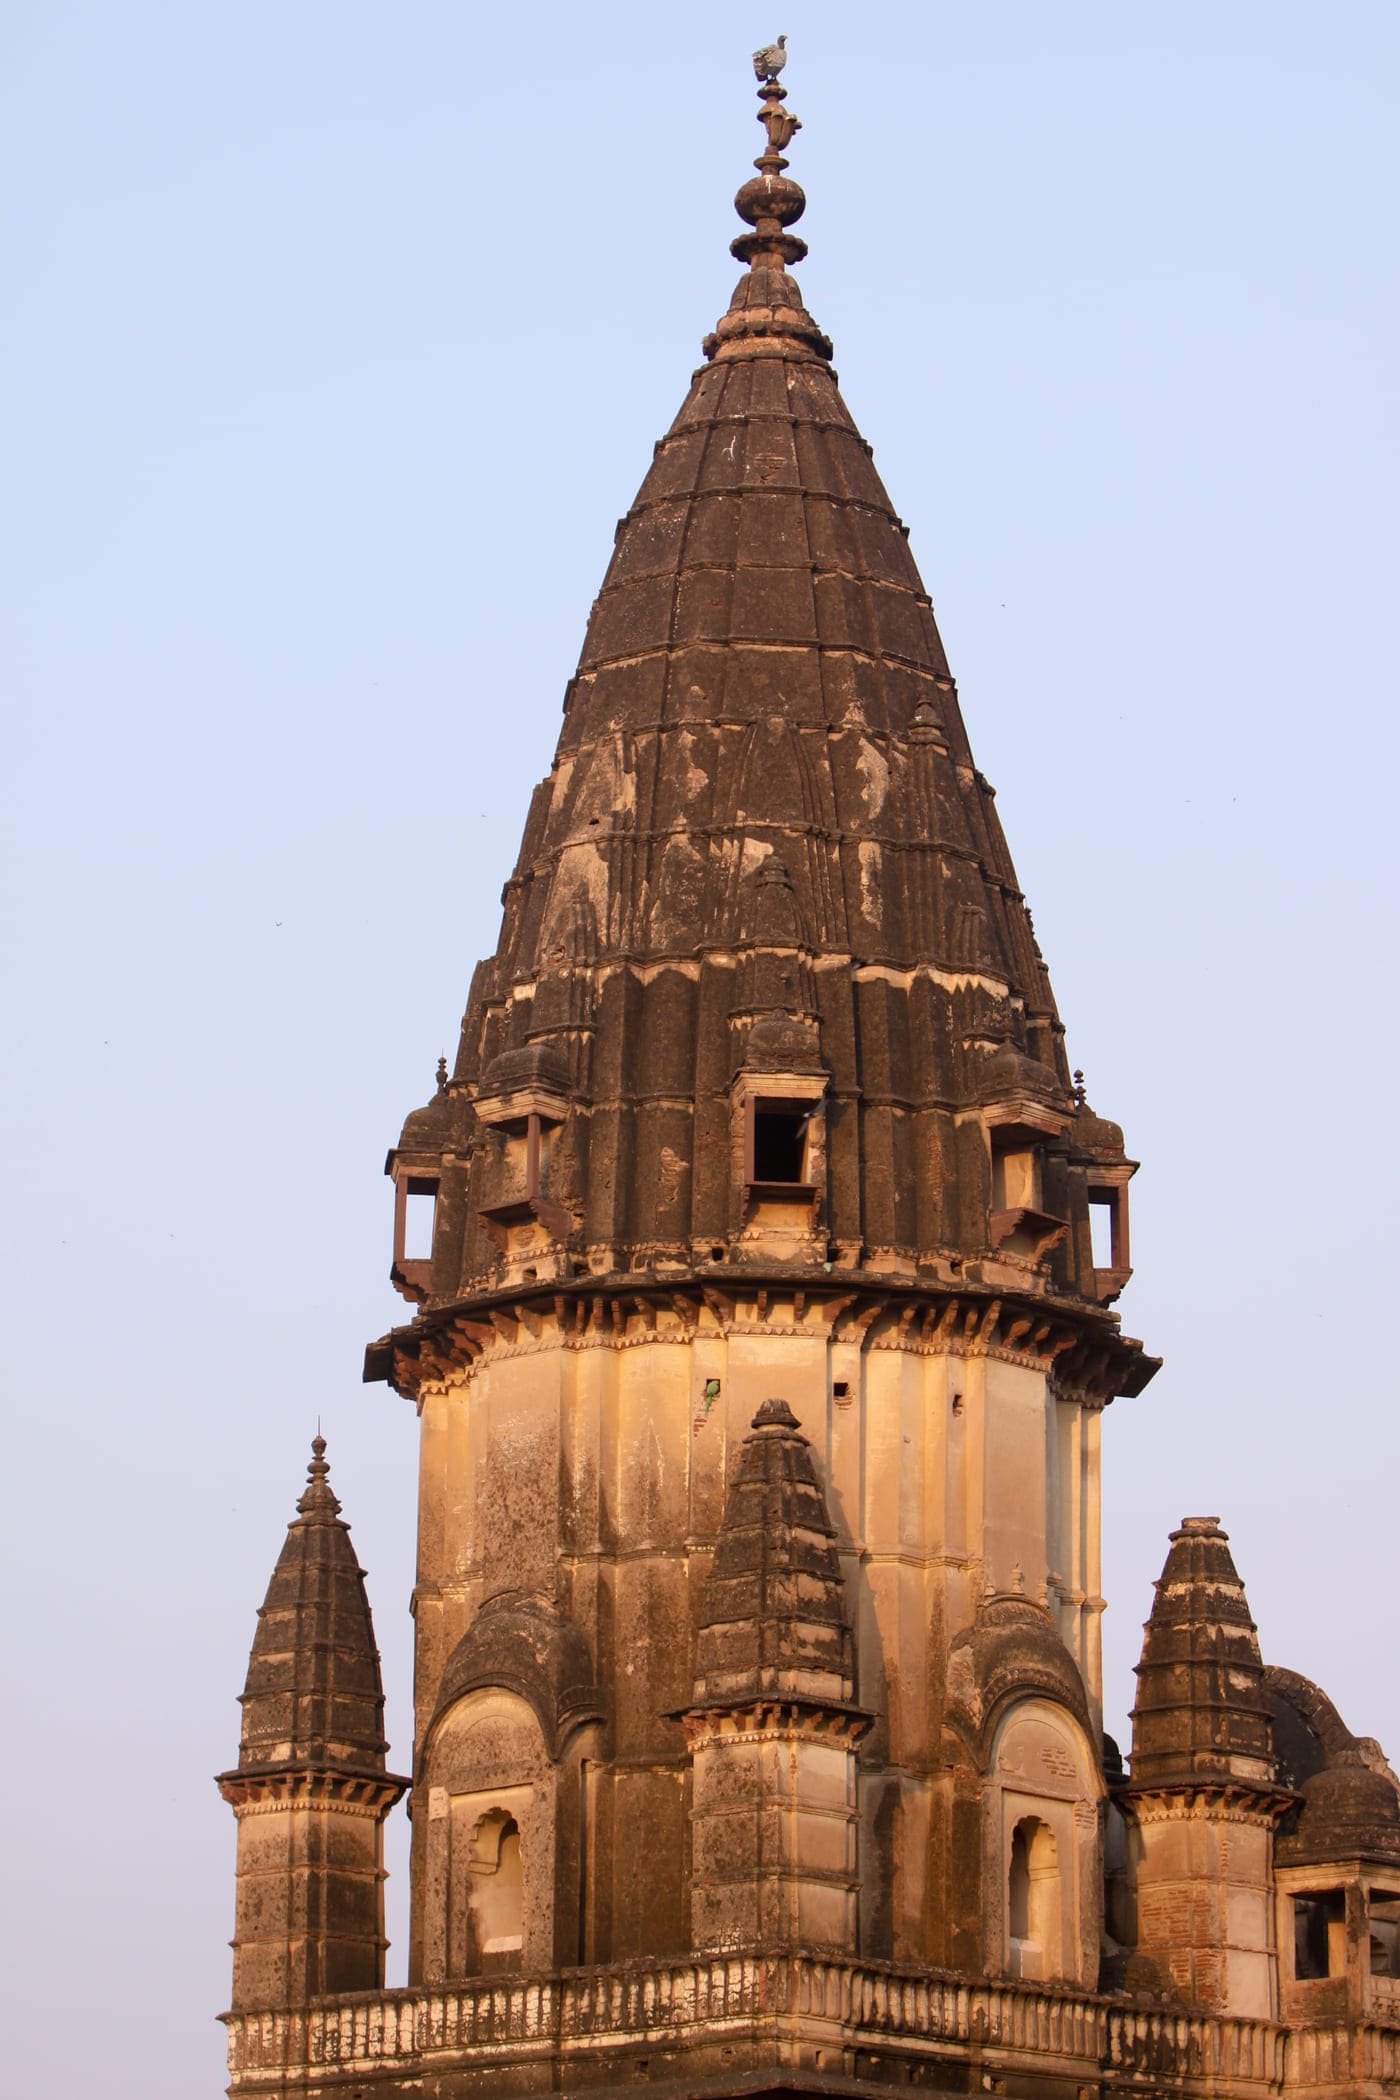 The shot of an ancient temple with multiple stories and unique architecture in the idyllic town of Orchha set on the banks of Betwa river